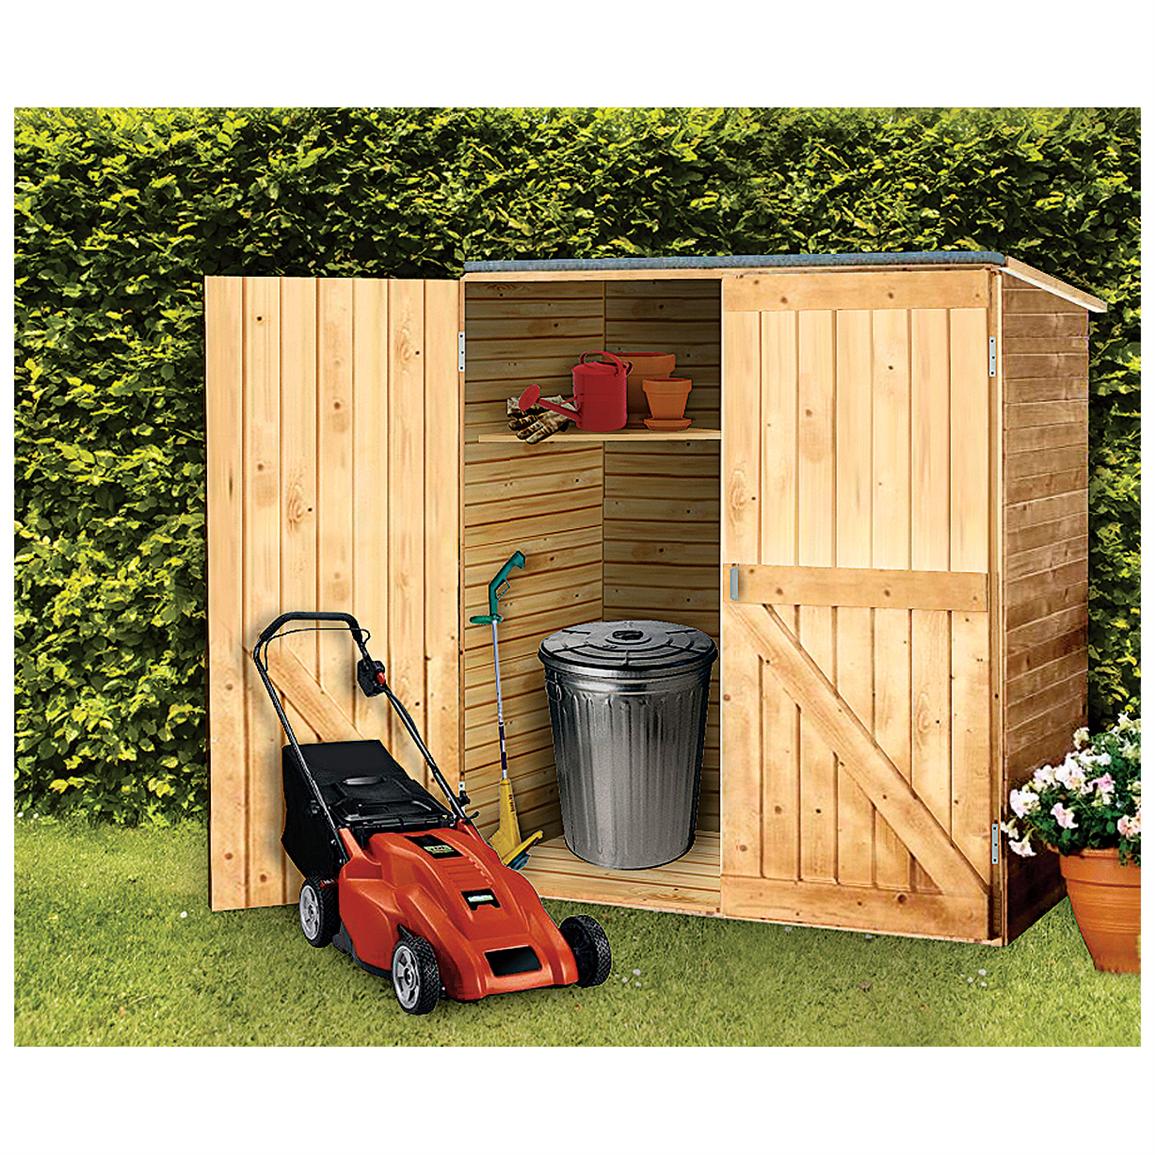 Solid Wood Outdoor Storage Shed 236390, Patio Storage at Sportsman's Guide